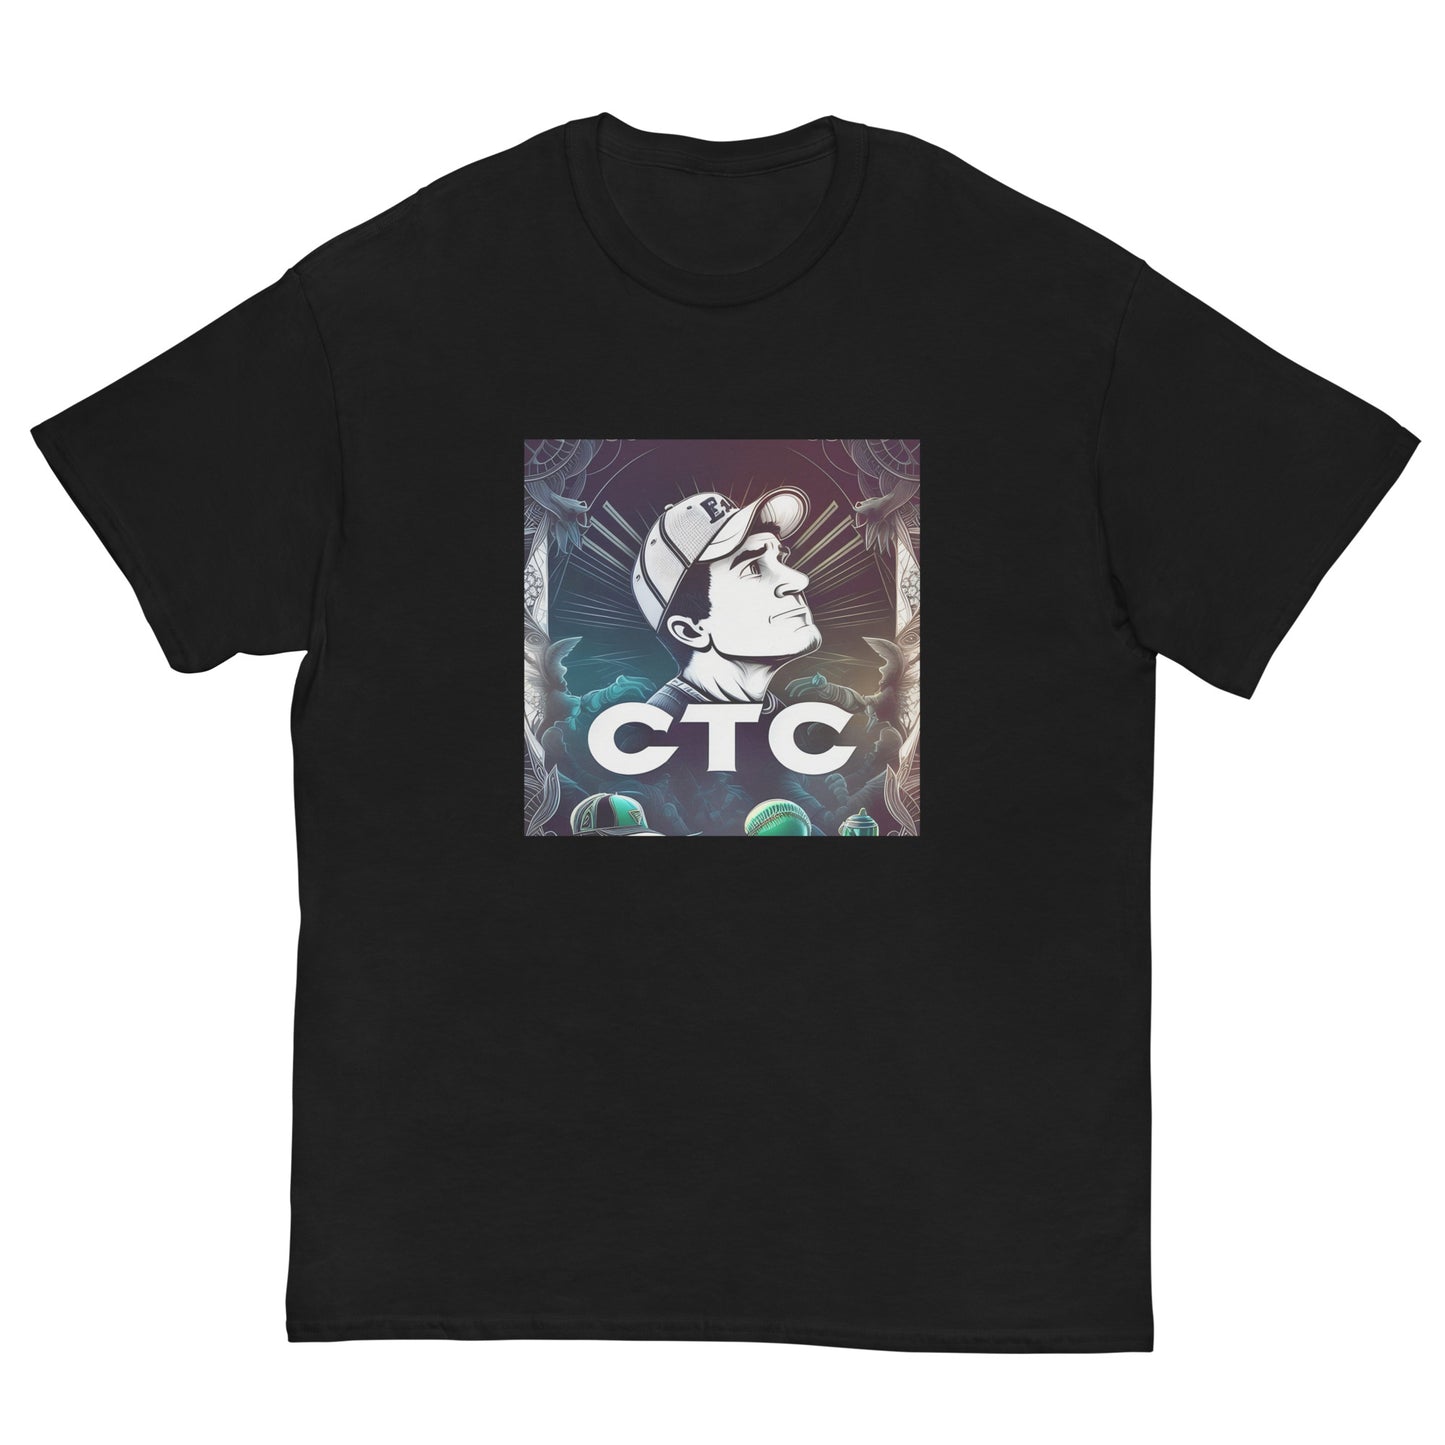 CTC Graphic Country tee